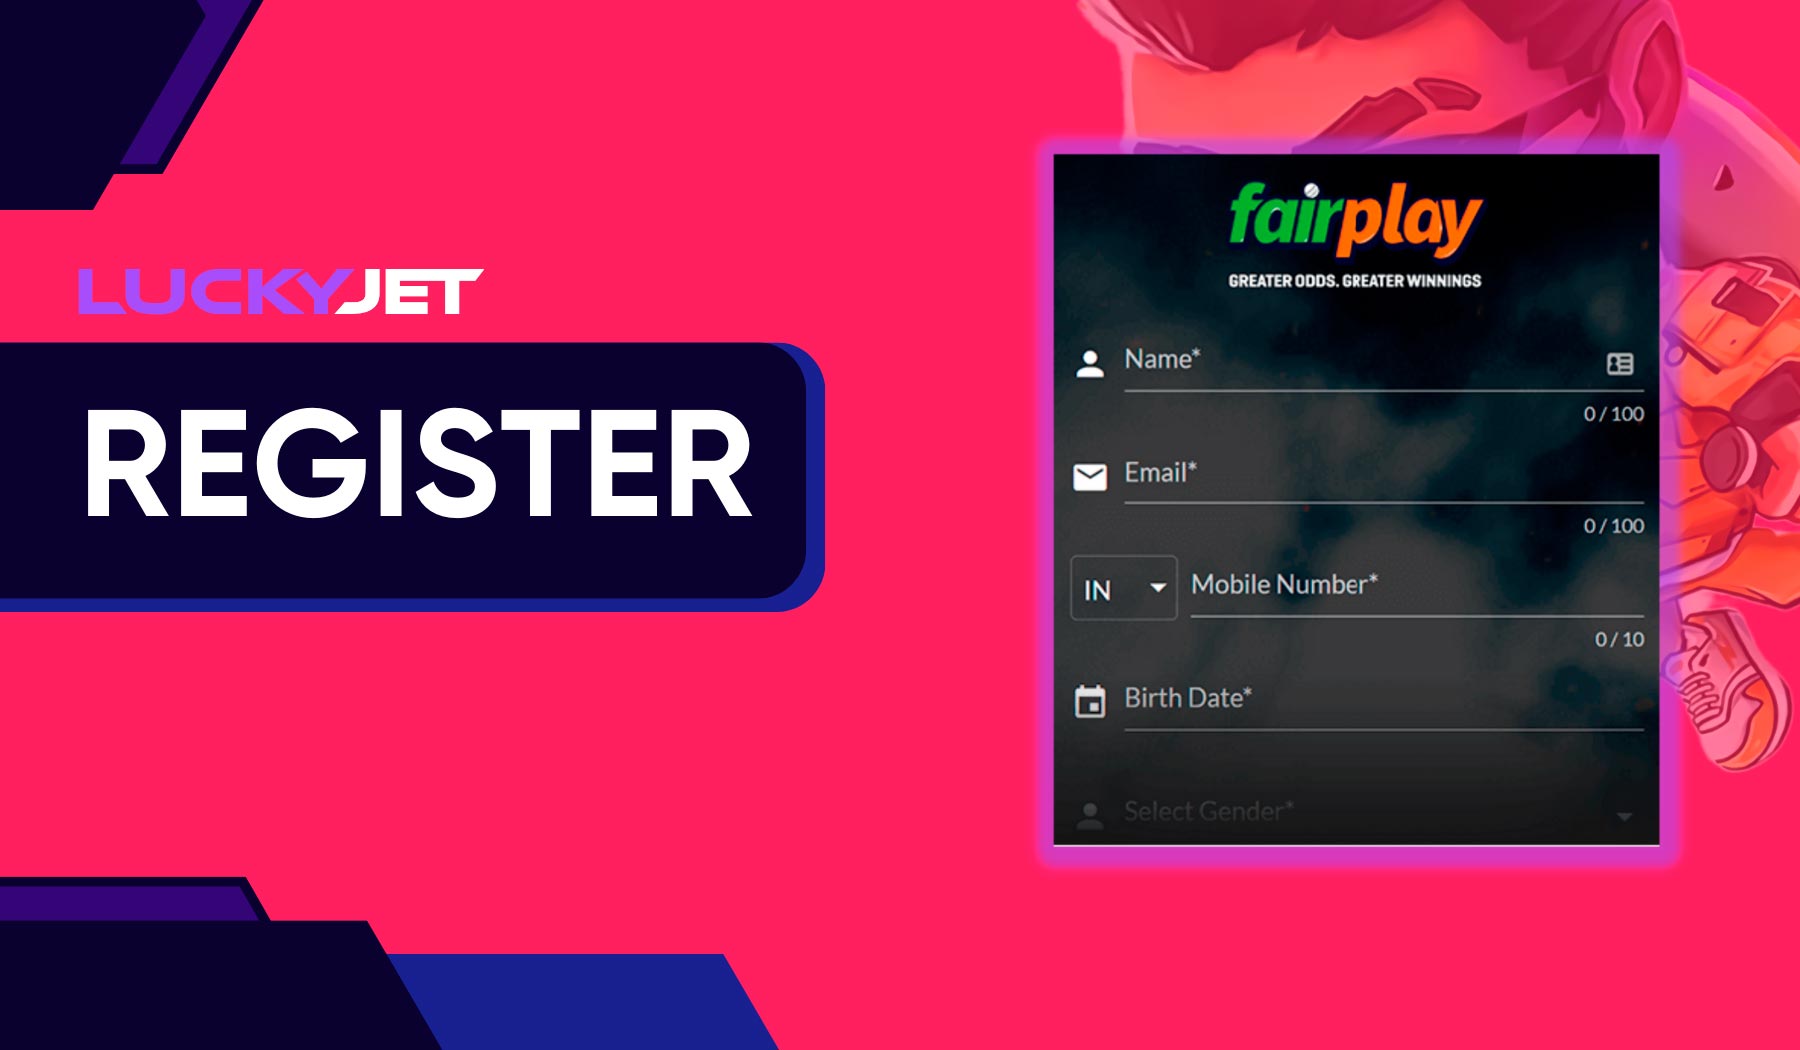 To play Lucky Jet, you need to complete a quick registration on the Fairplay platform